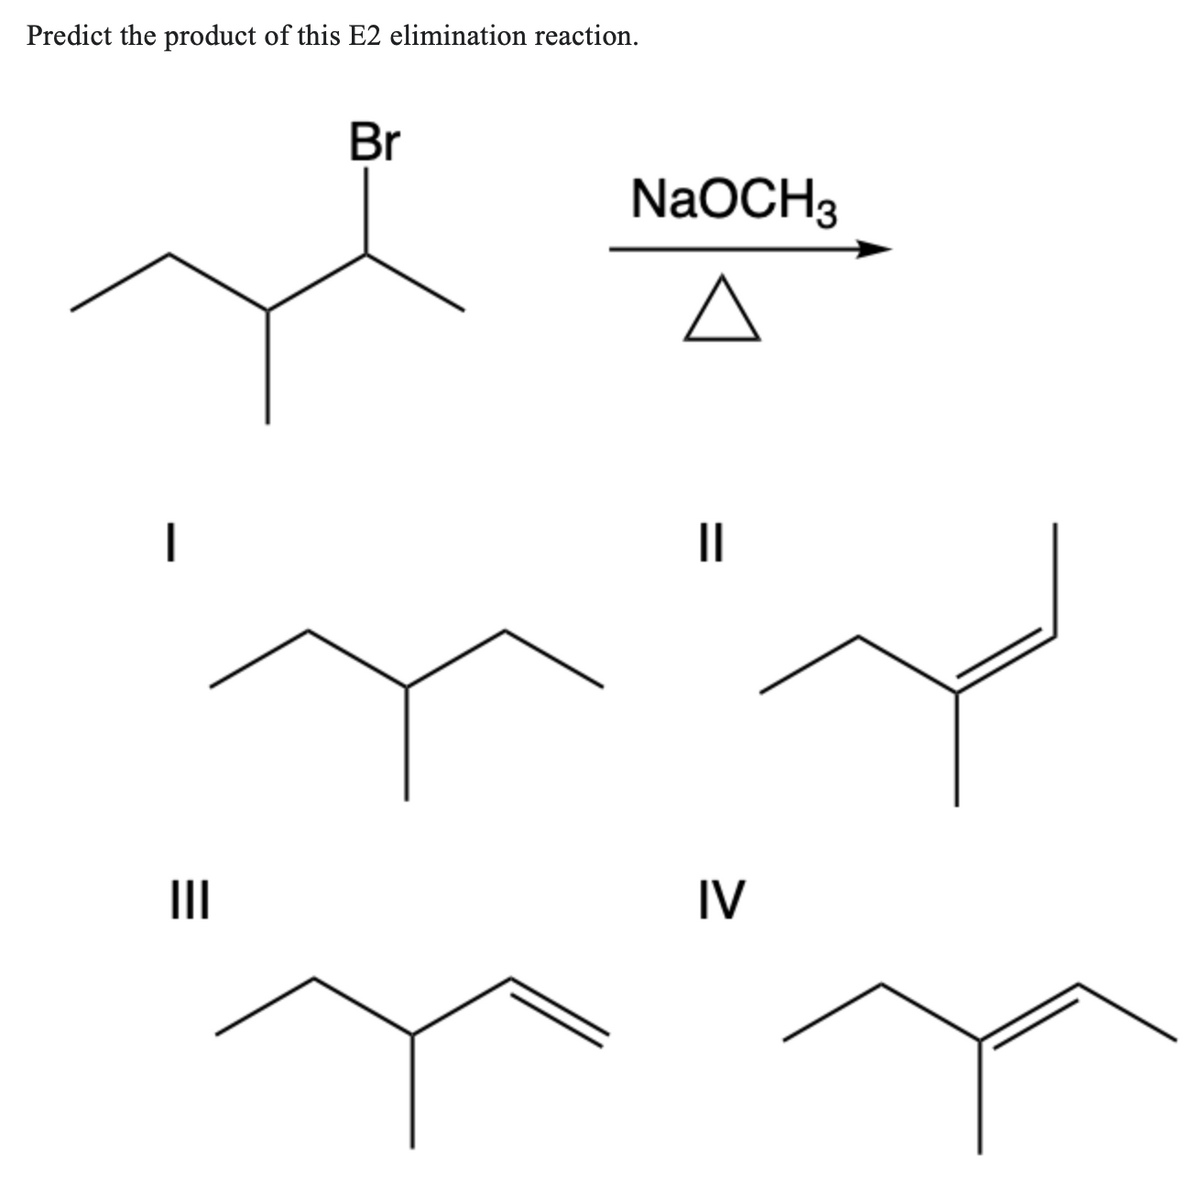 Predict the product of this E2 elimination reaction.
|||
Br
NaOCH3
||
=
IV